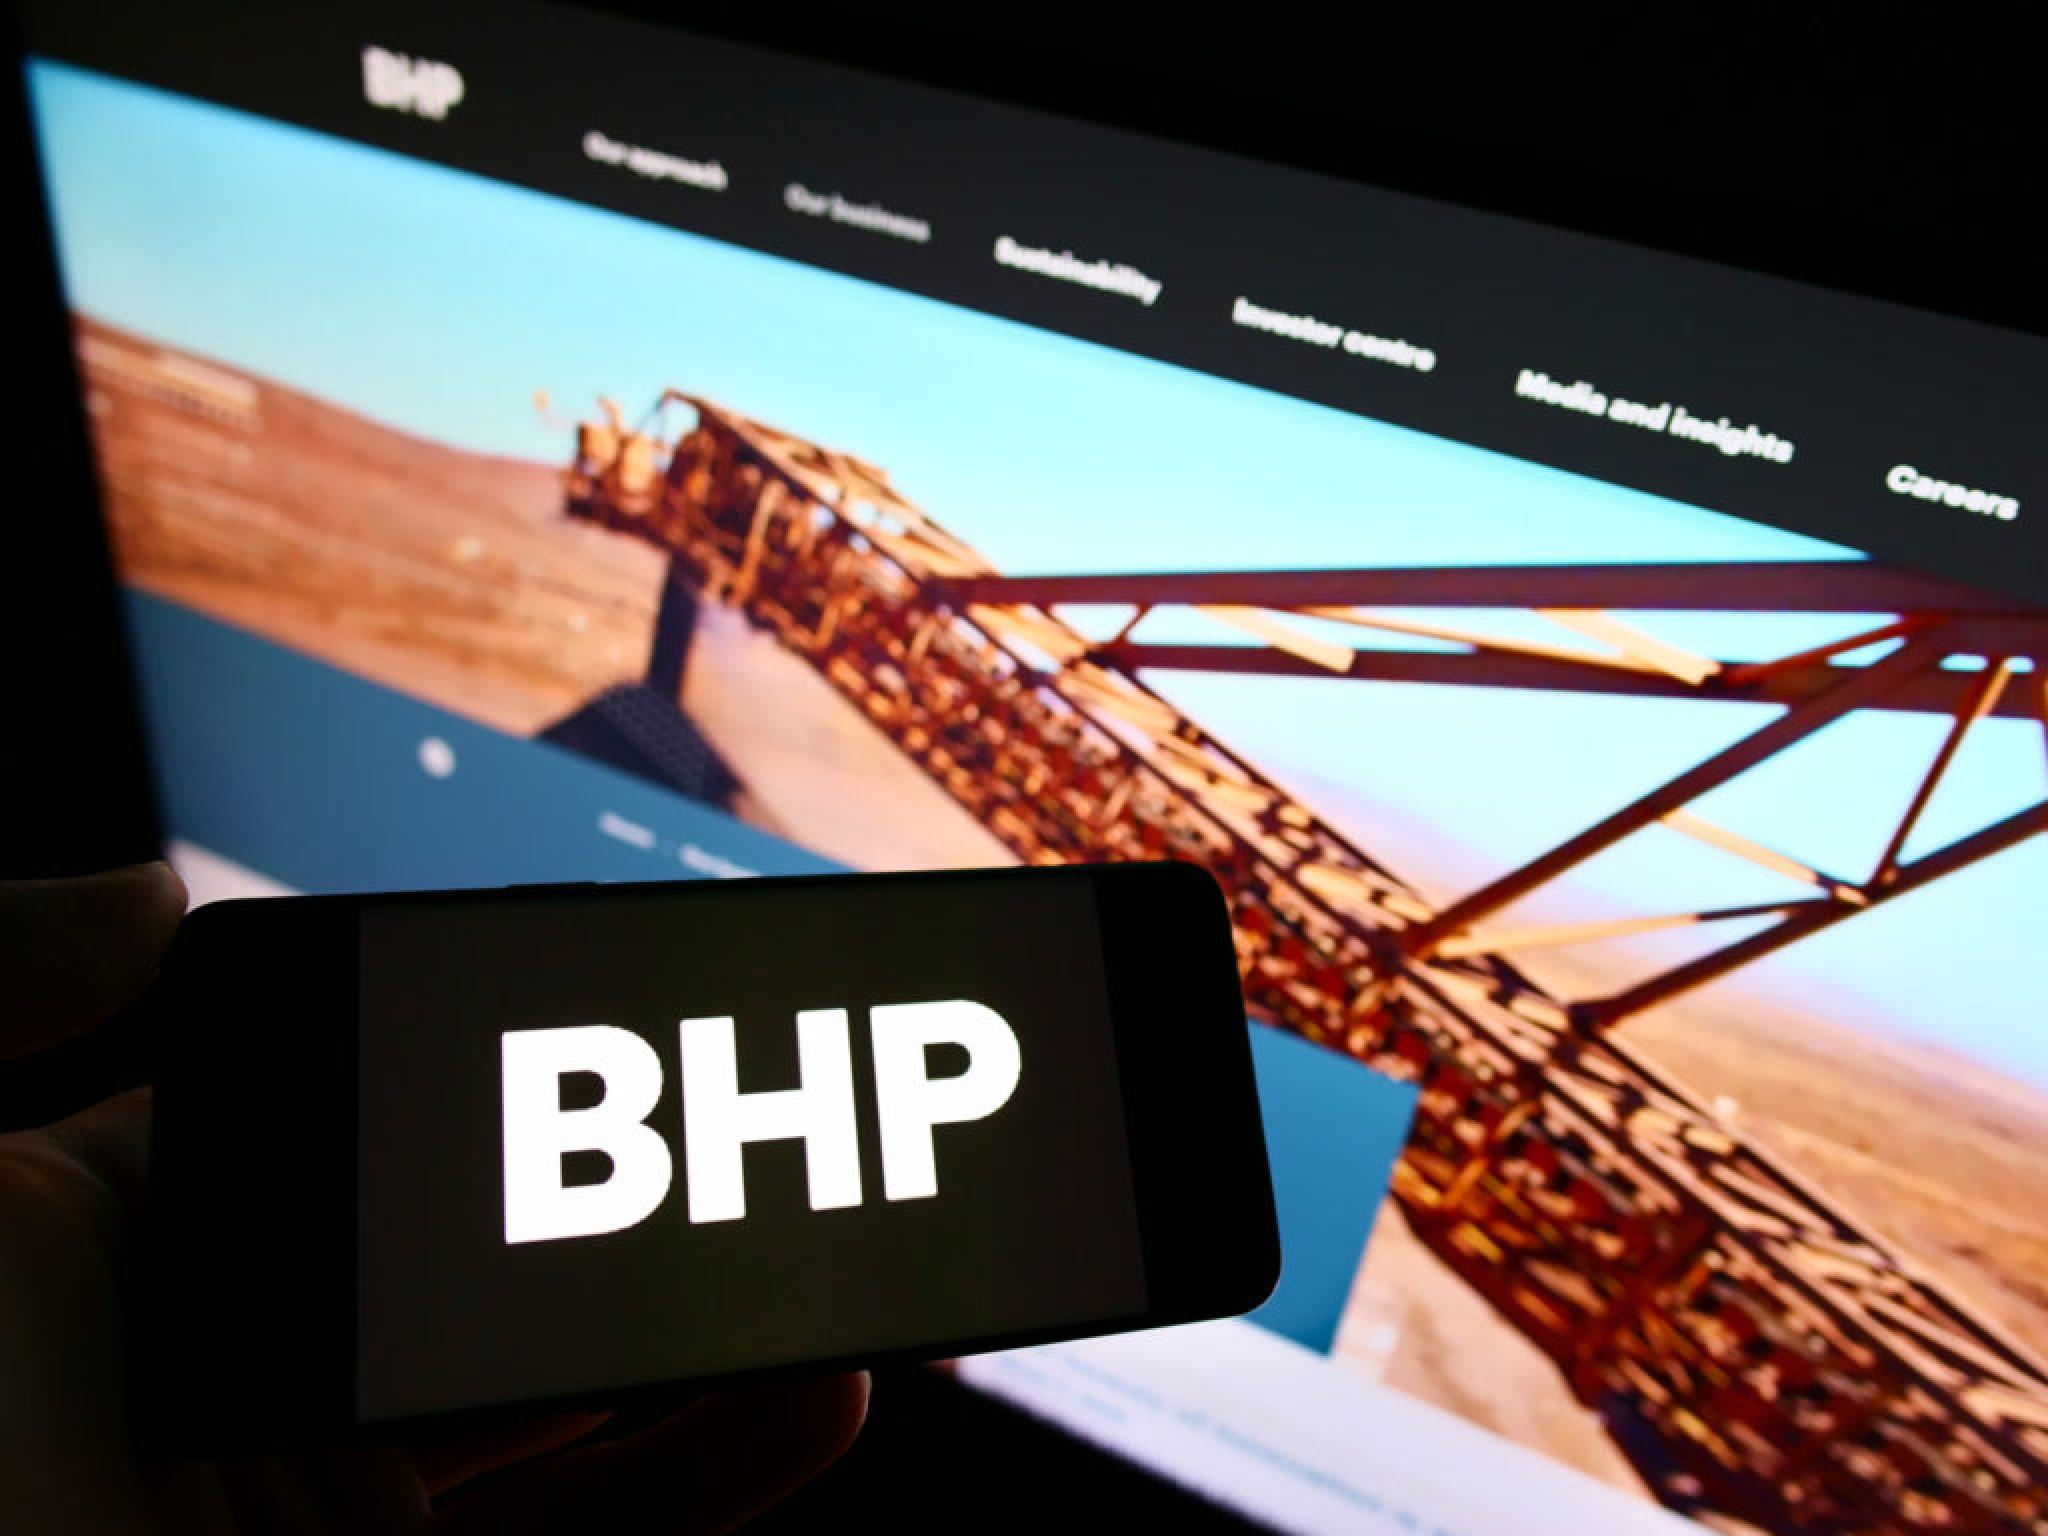  bhp-in-25b-settlement-5e-advanced-materials-begins-boric-acid-production-goldmining-reduces-crucero-royalty-and-more-mondays-top-mining-stories 